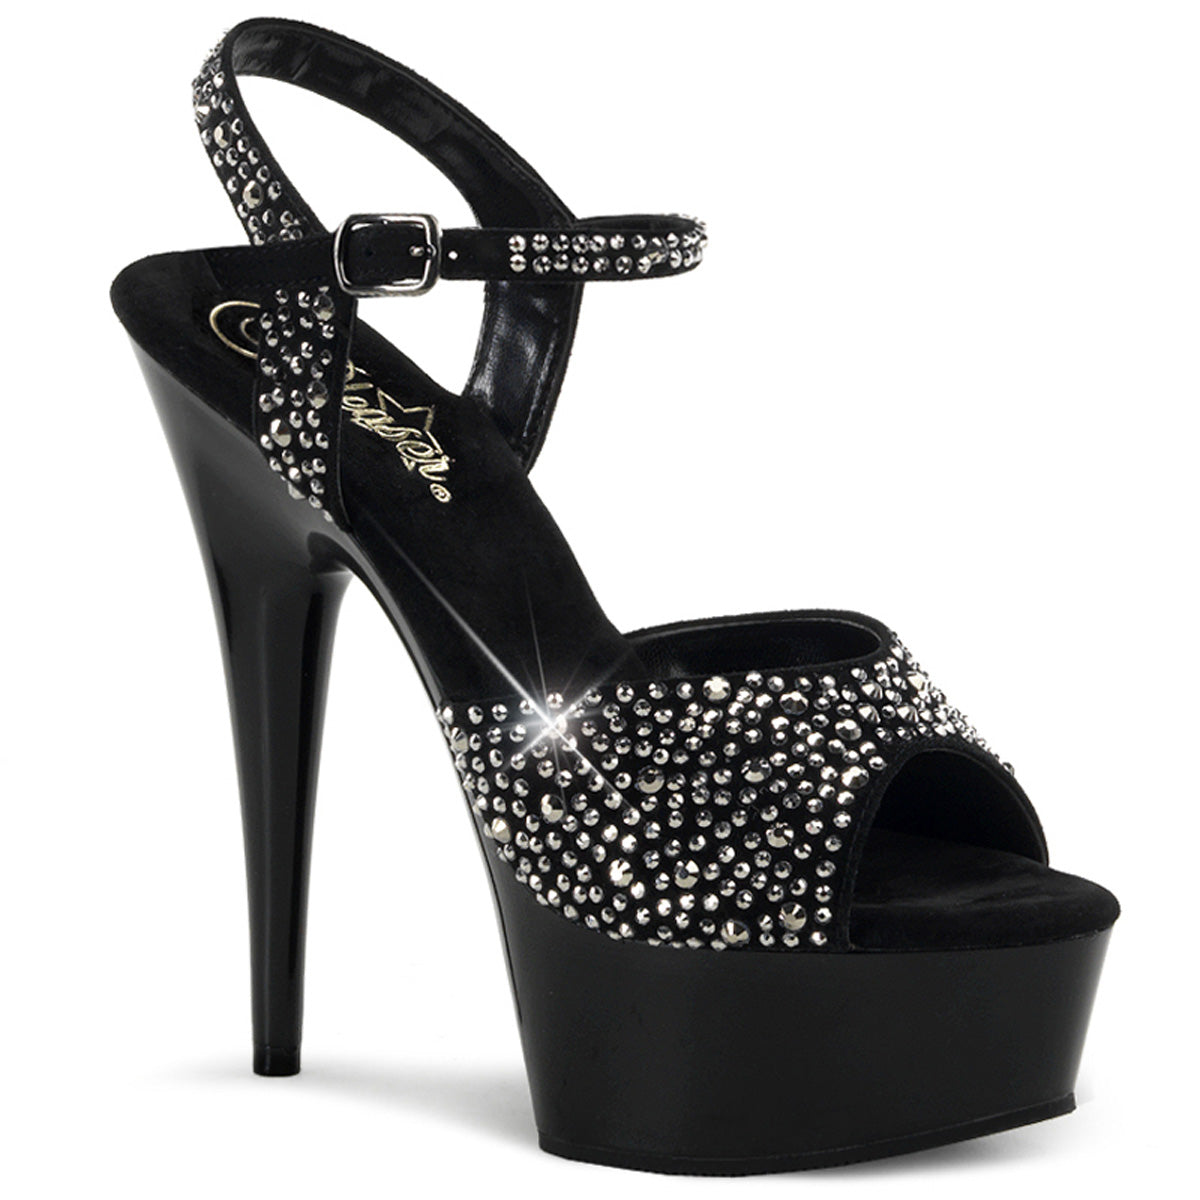 DELIGHT-609RS 6" Heel Black w Pewter Rhinestone Sexy Shoes